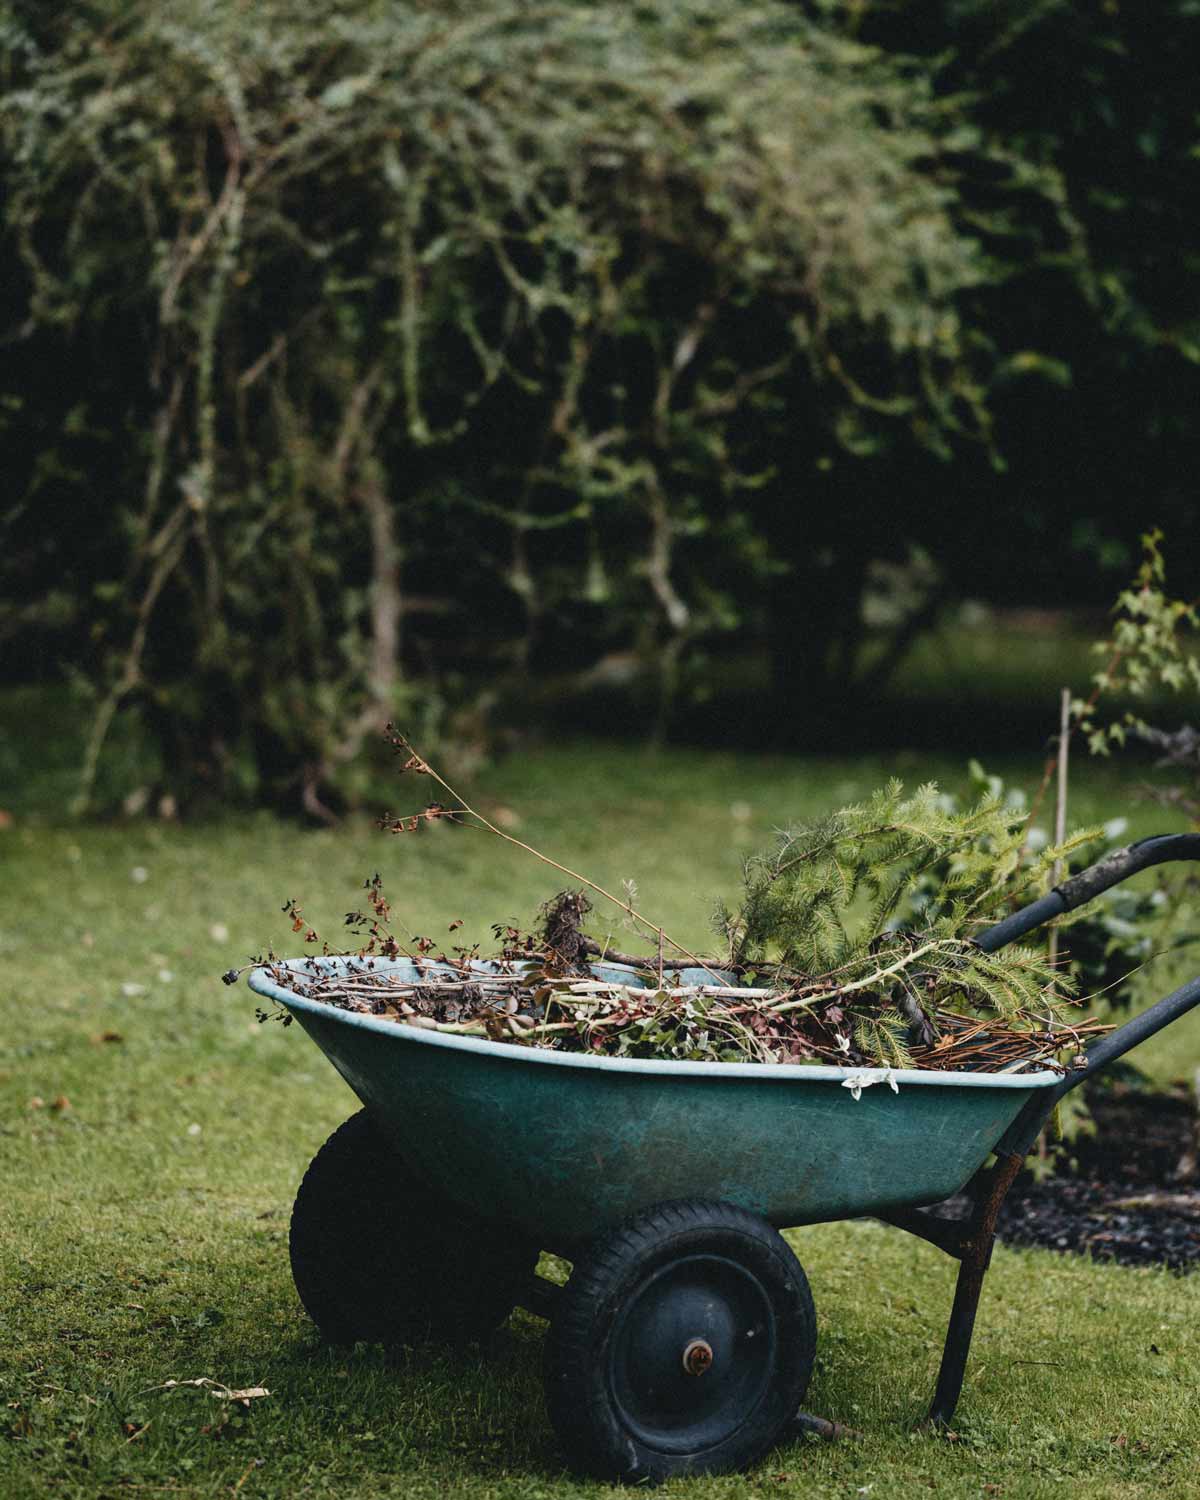 How To Compost At Home: A Guide For Beginners | Good Fronds ...